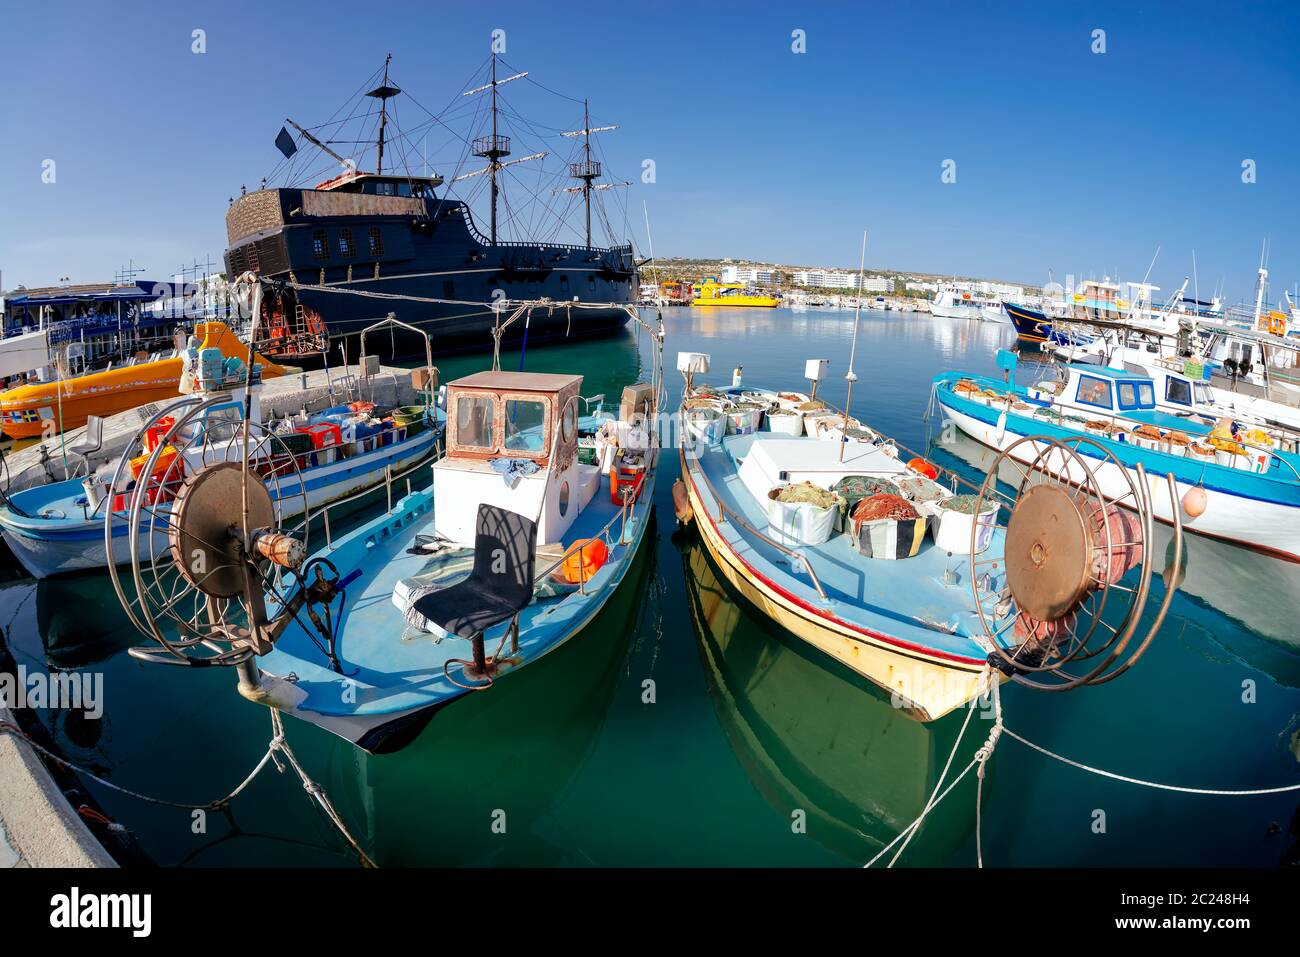 Traditional fishing boats in the harbour of Ayia Napa. Famagusta District, Cyprus Stock Photo